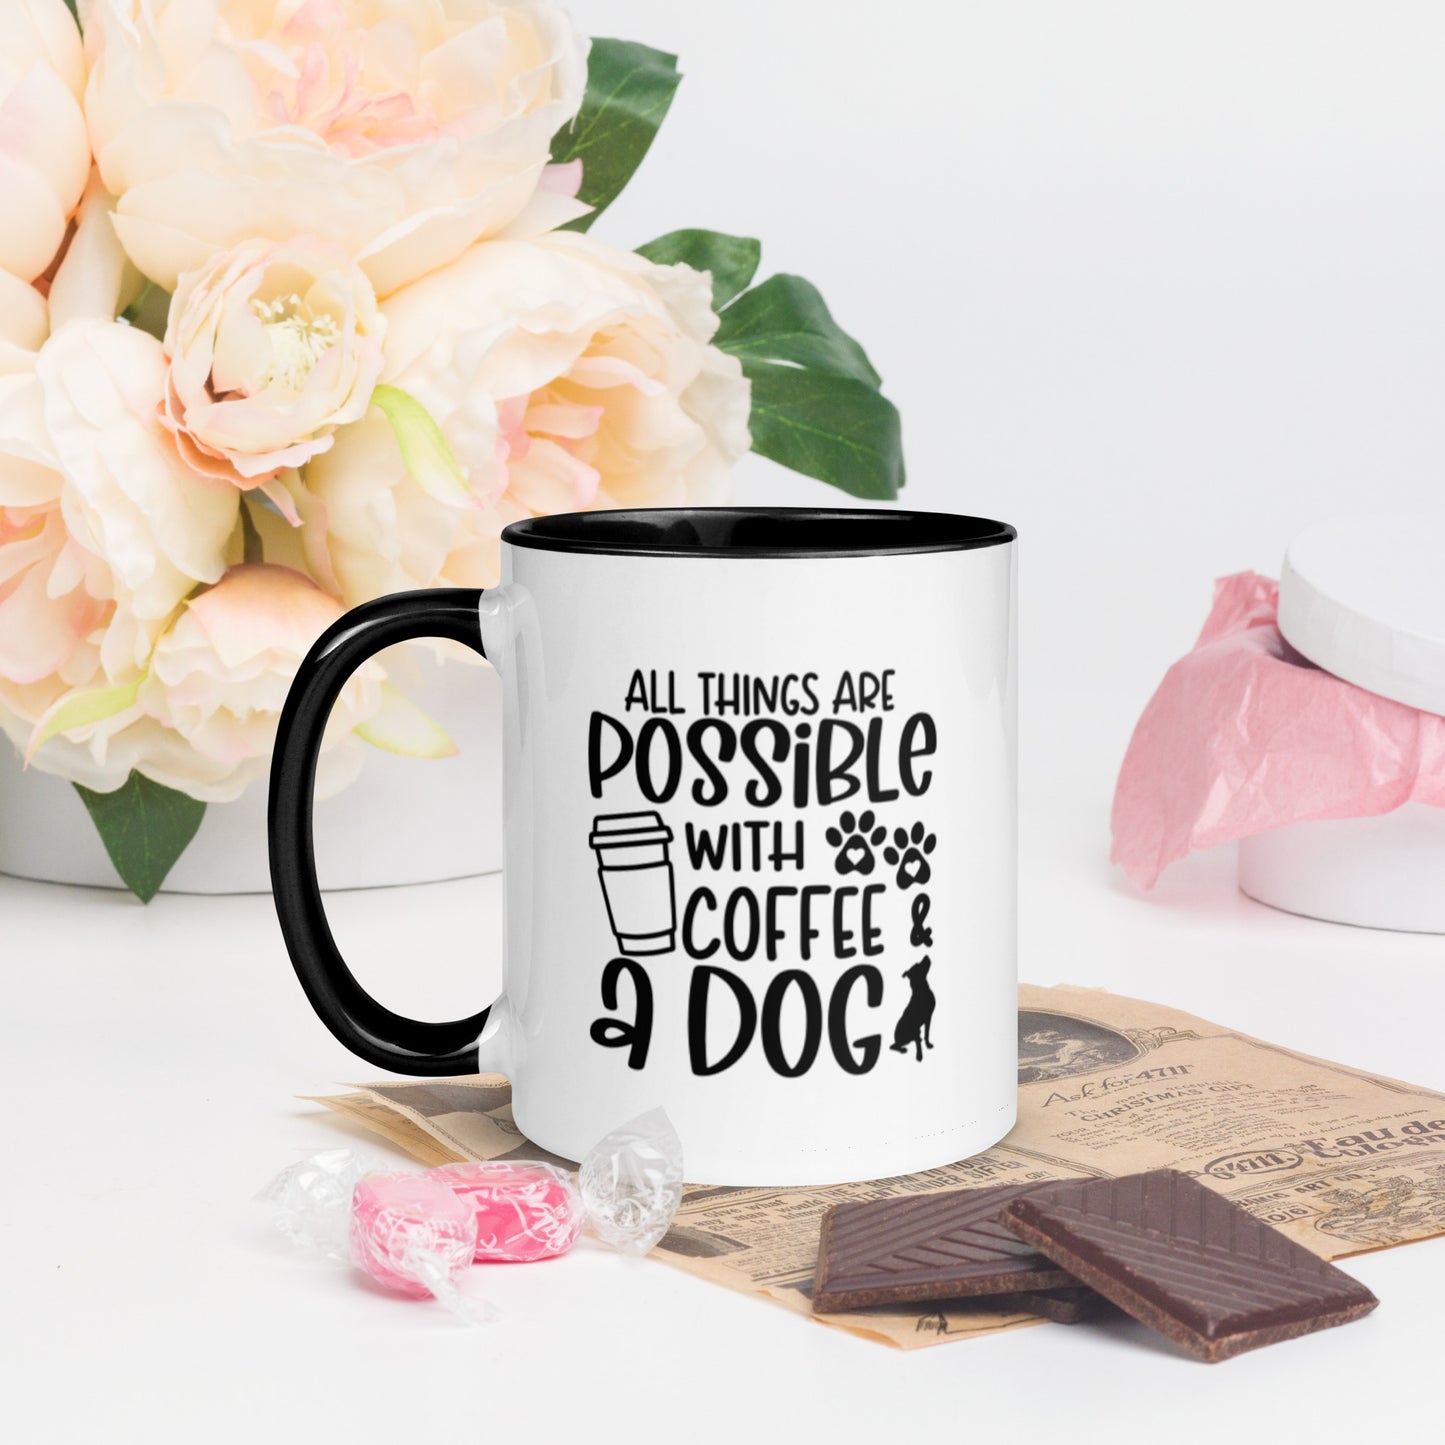 All is Possible with Coffee and a dog